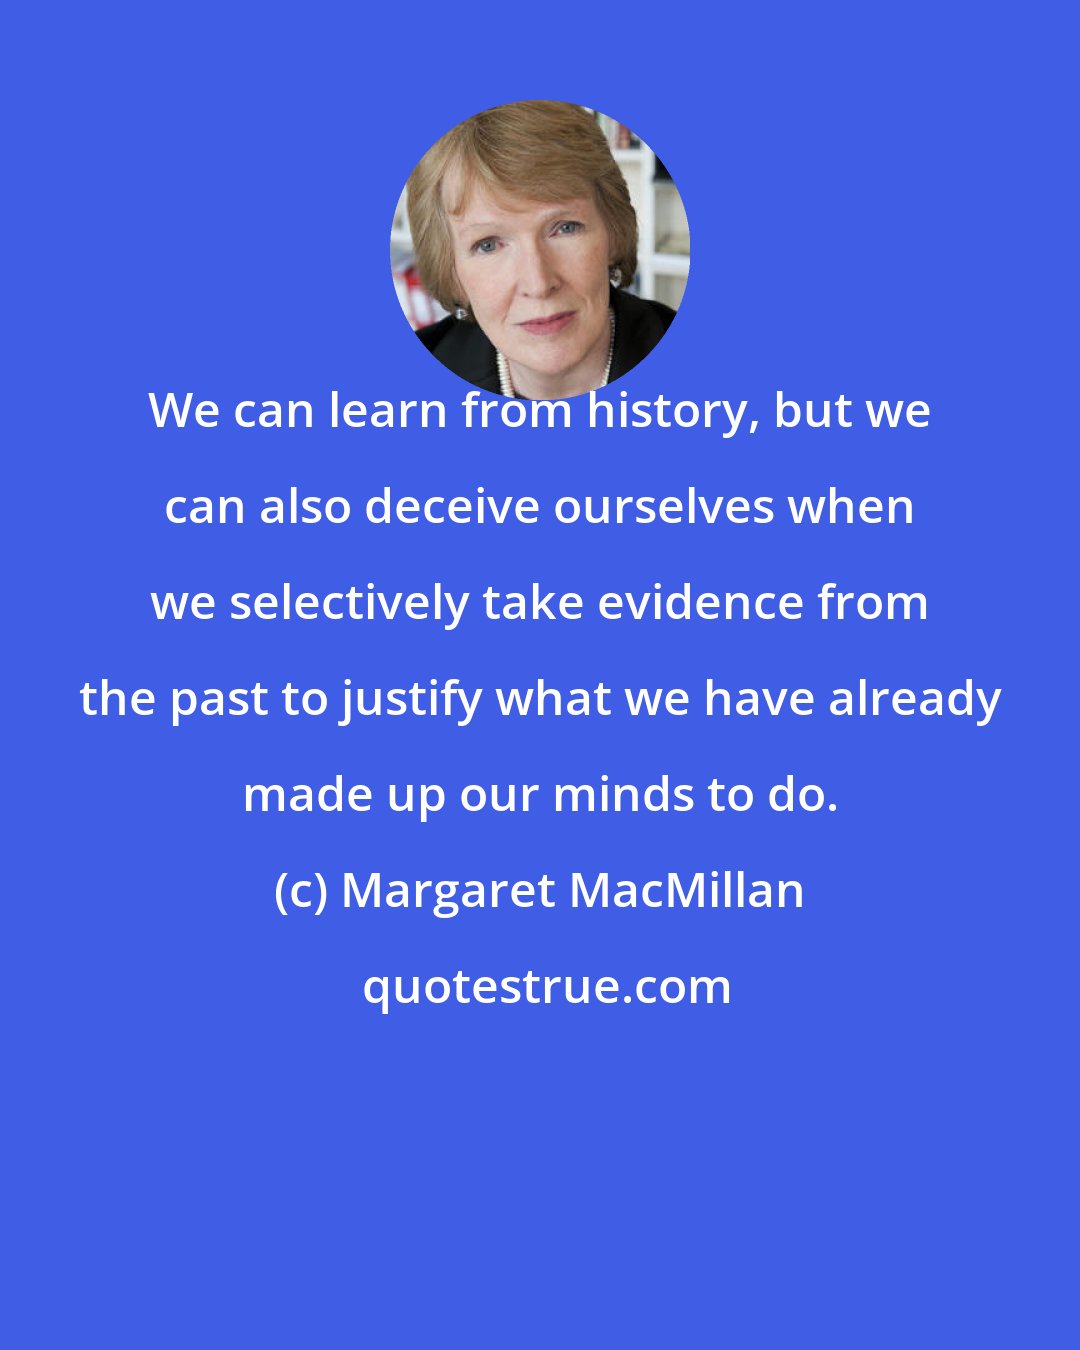 Margaret MacMillan: We can learn from history, but we can also deceive ourselves when we selectively take evidence from the past to justify what we have already made up our minds to do.